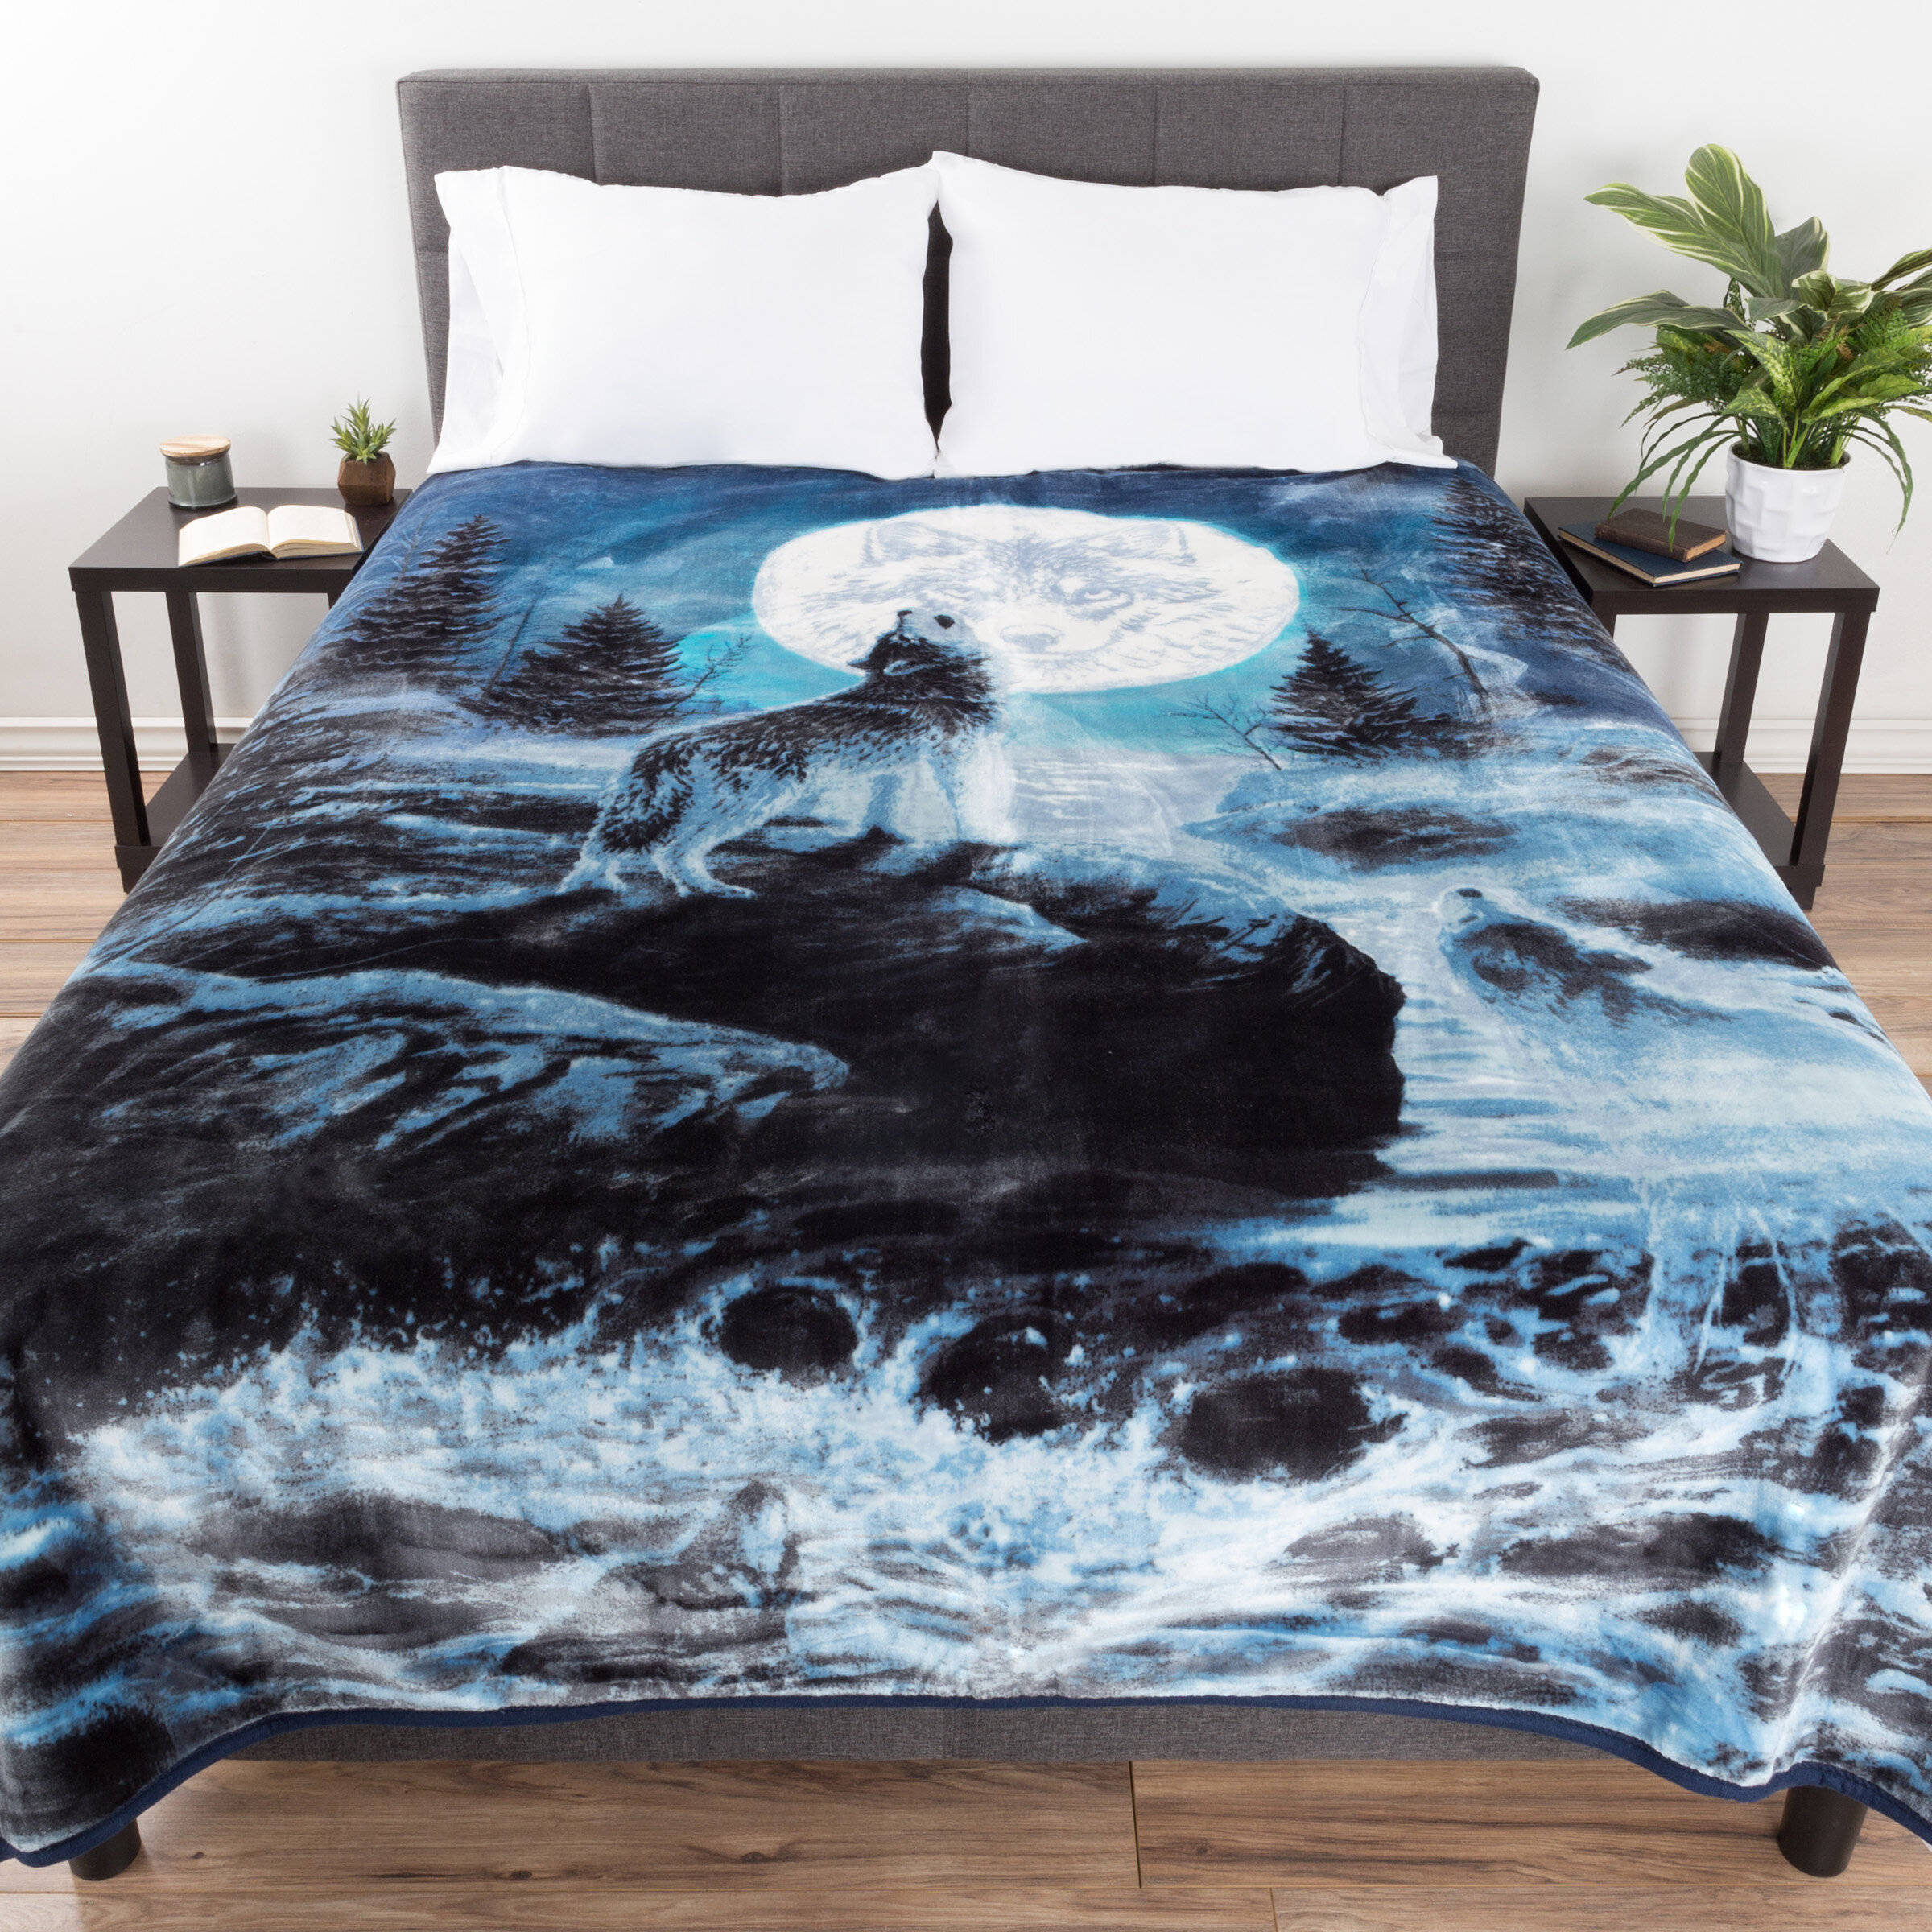 Comfortable Breathable Home Must Haves Bed Luxurious Plush Throw Blanket Black Super Soft 